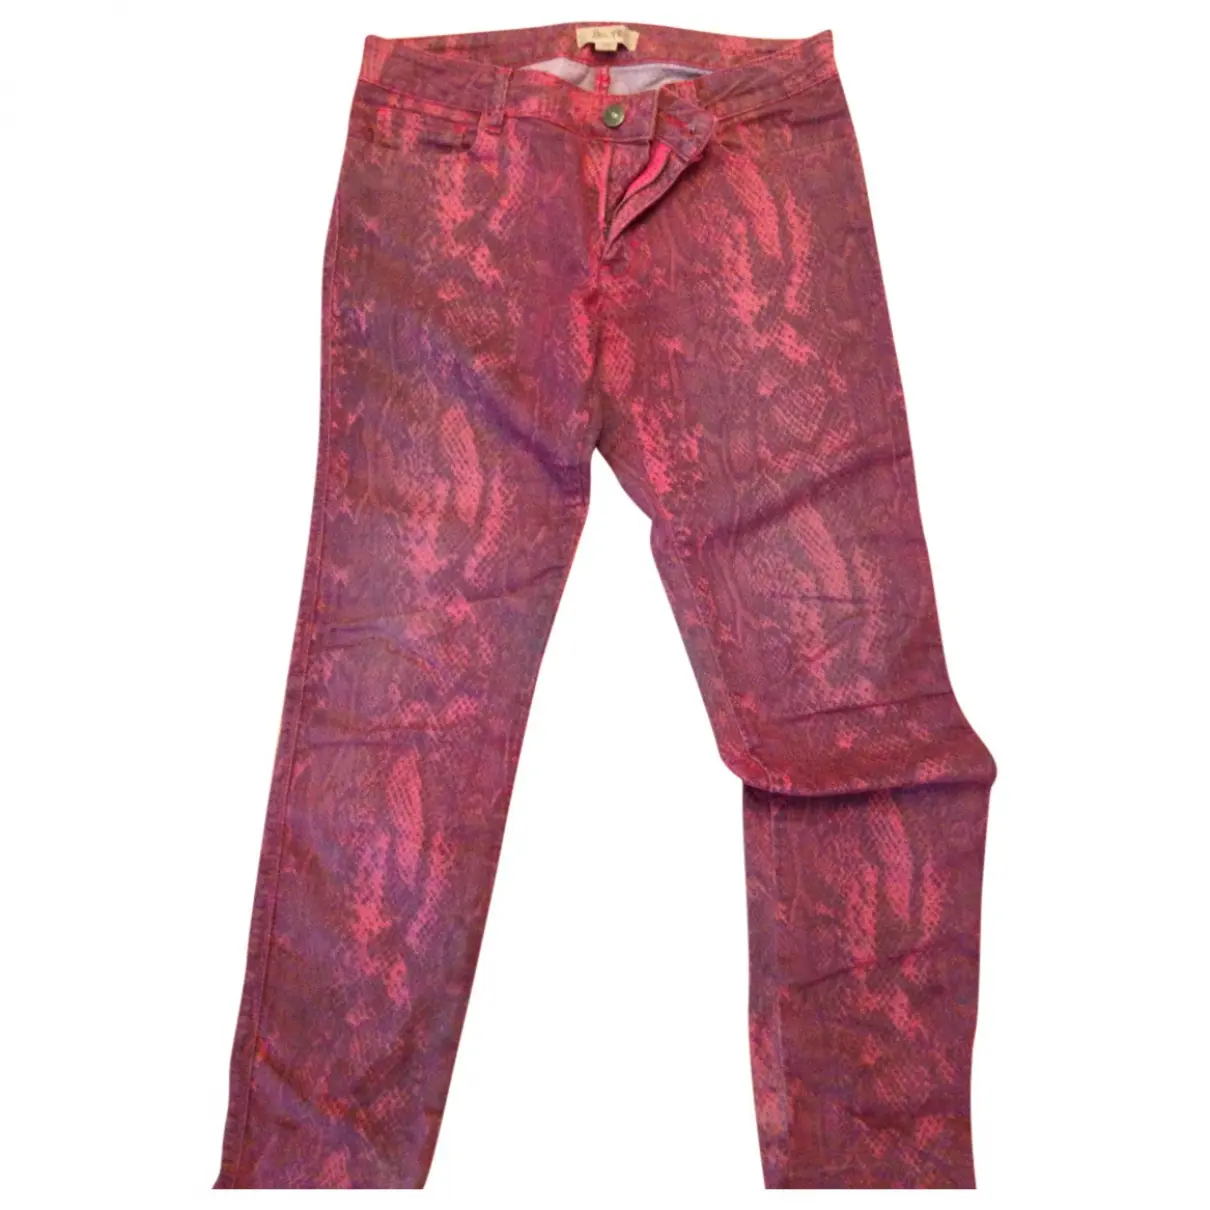 Red Cotton Trousers Bel Air